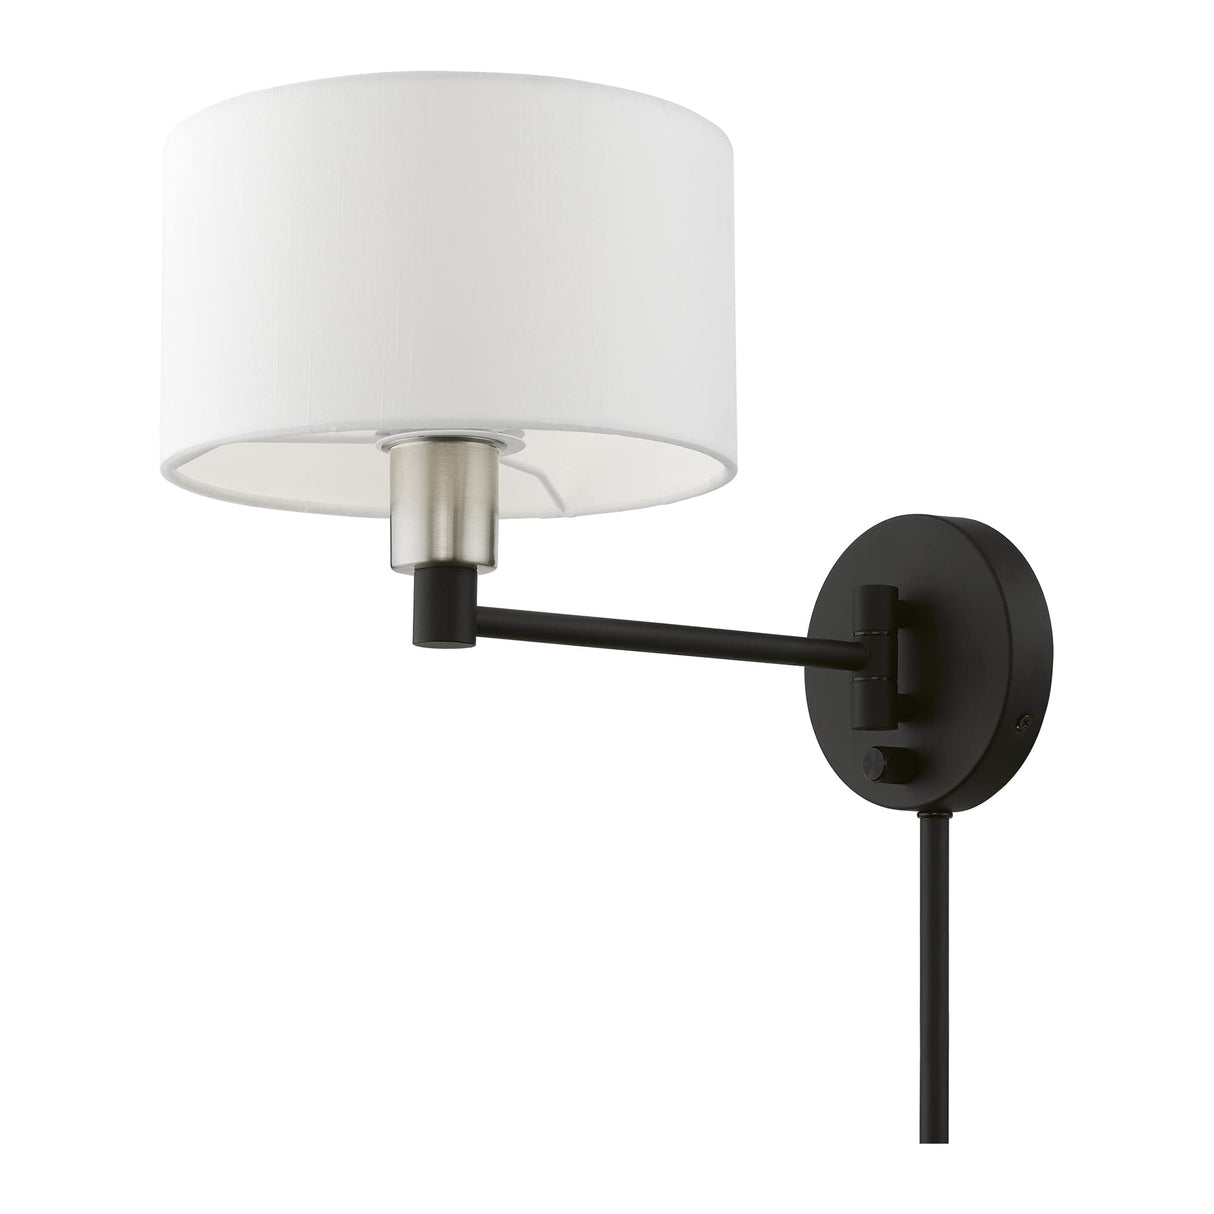 Livex Lighting 40080-04 1 Light Swing Arm Wall Lamp, Black with Brushed Nickel Accent, 9 x 9.75